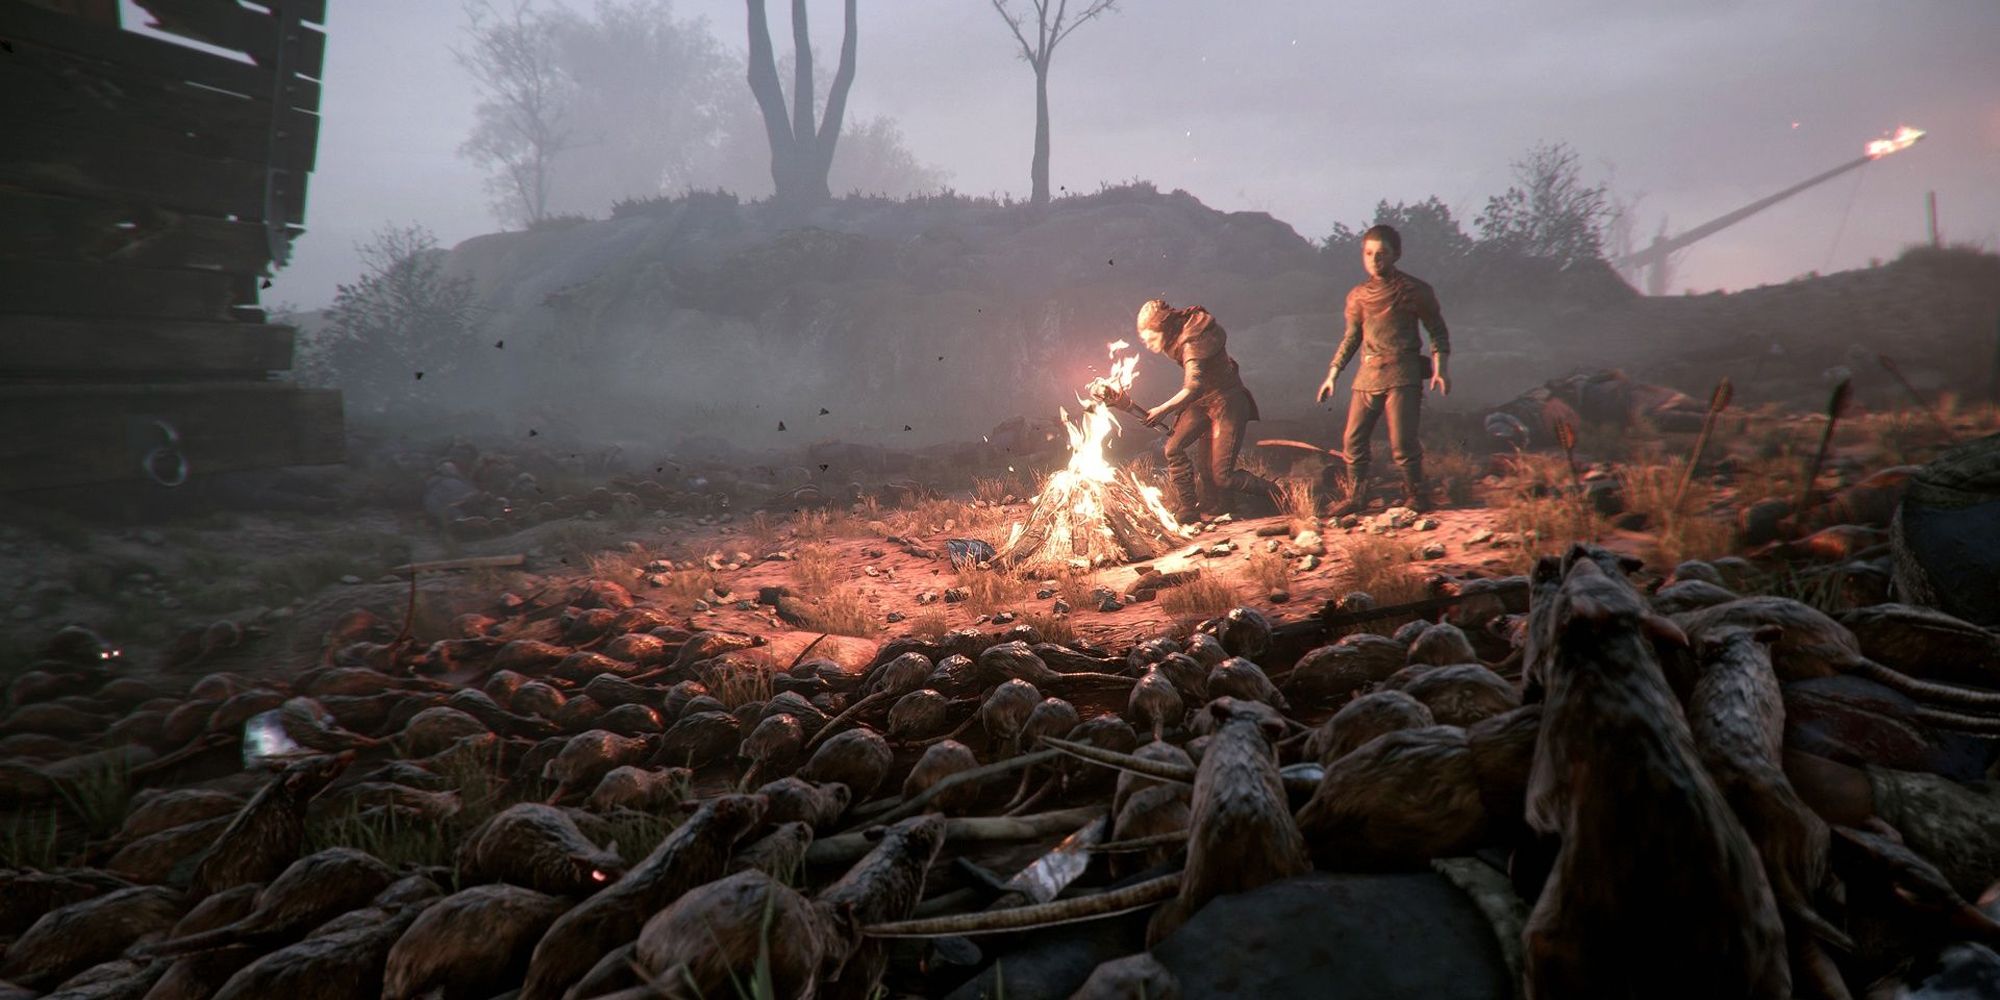 Every Improvement For The PS5 And Xbox Series X Upgrade Of A Plague Tale:  Innocence